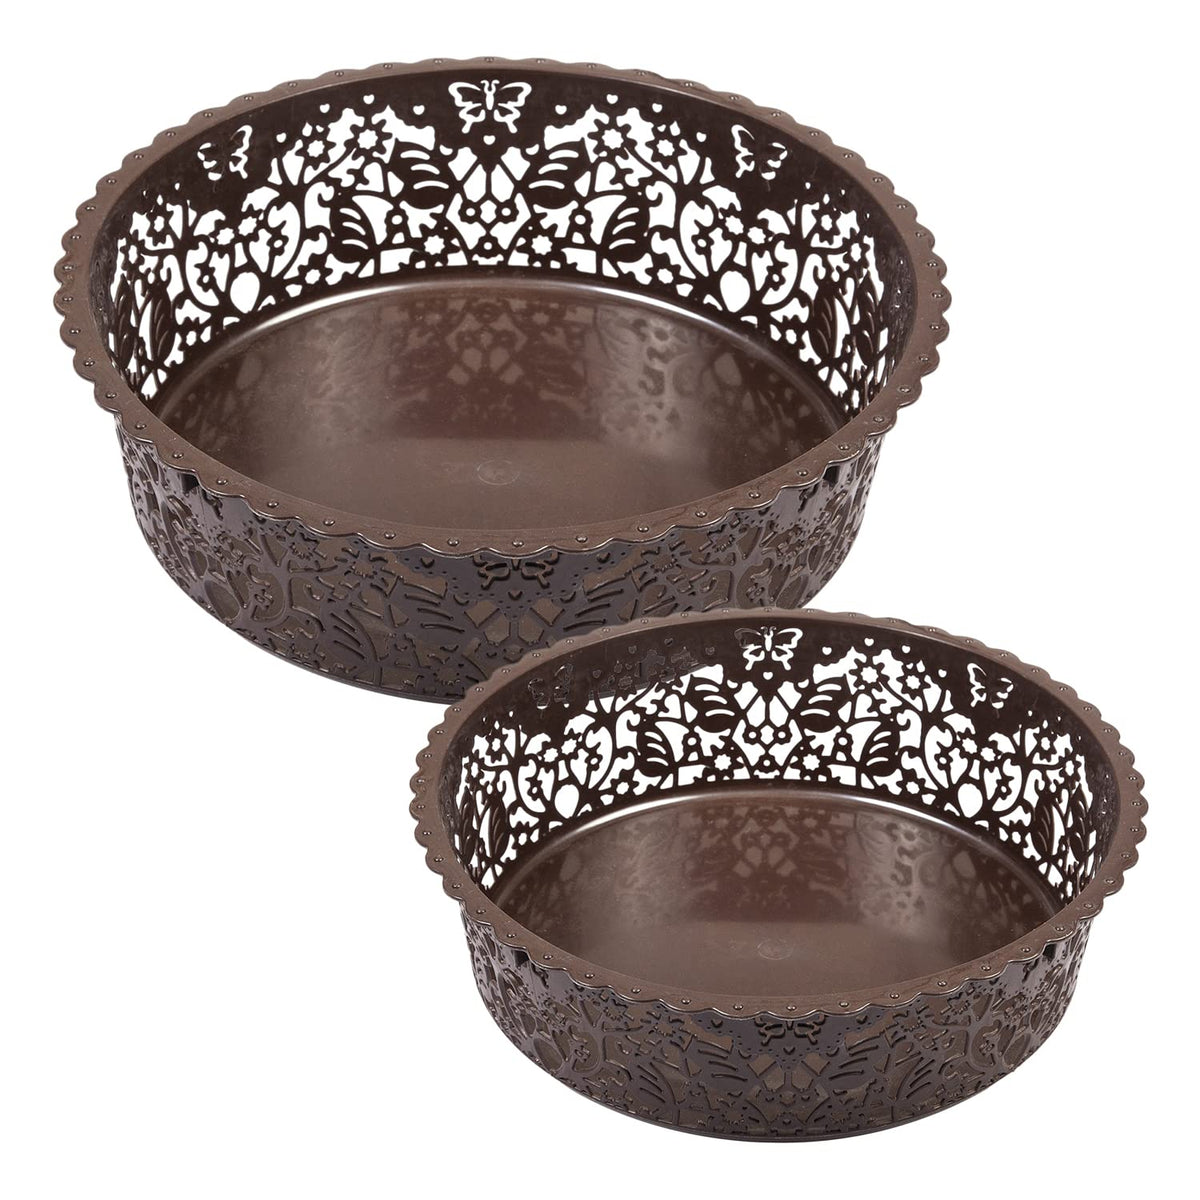 Kuber Industries Leaf Design Multipurpose Round Shape Basket Ideal For Friuts, Vegetable, Toys Small & Large Pack of 2 (Brown)